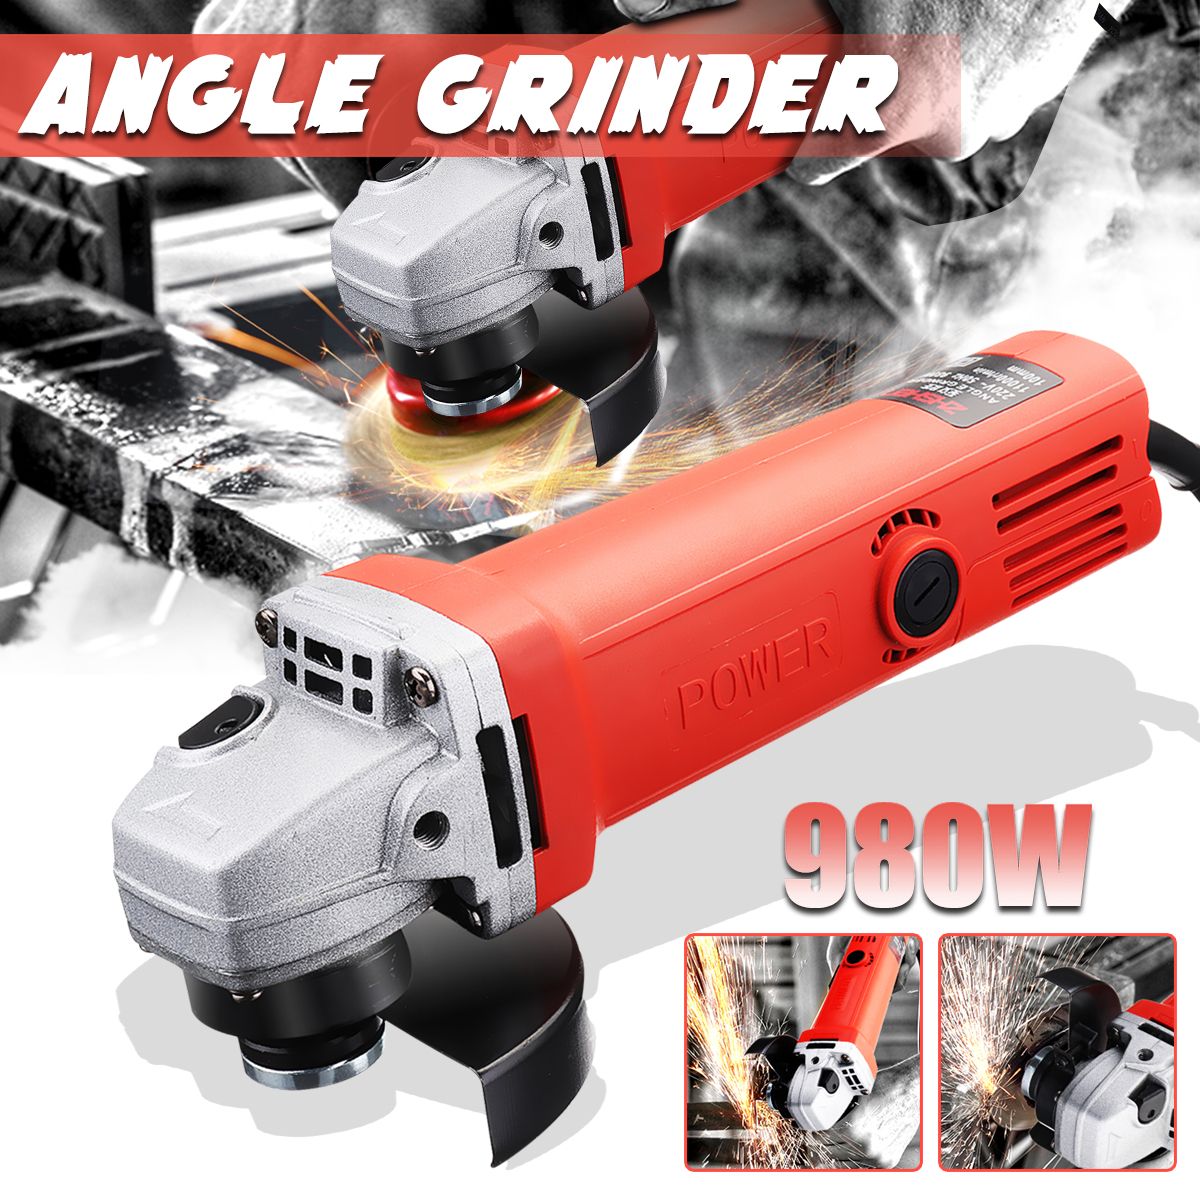 ZS-980-220V-980W-Protable-Electric-Angle-Grinder-Muti-Function-Cutting-Polishing-Tools-Hand-Grinding-1413130